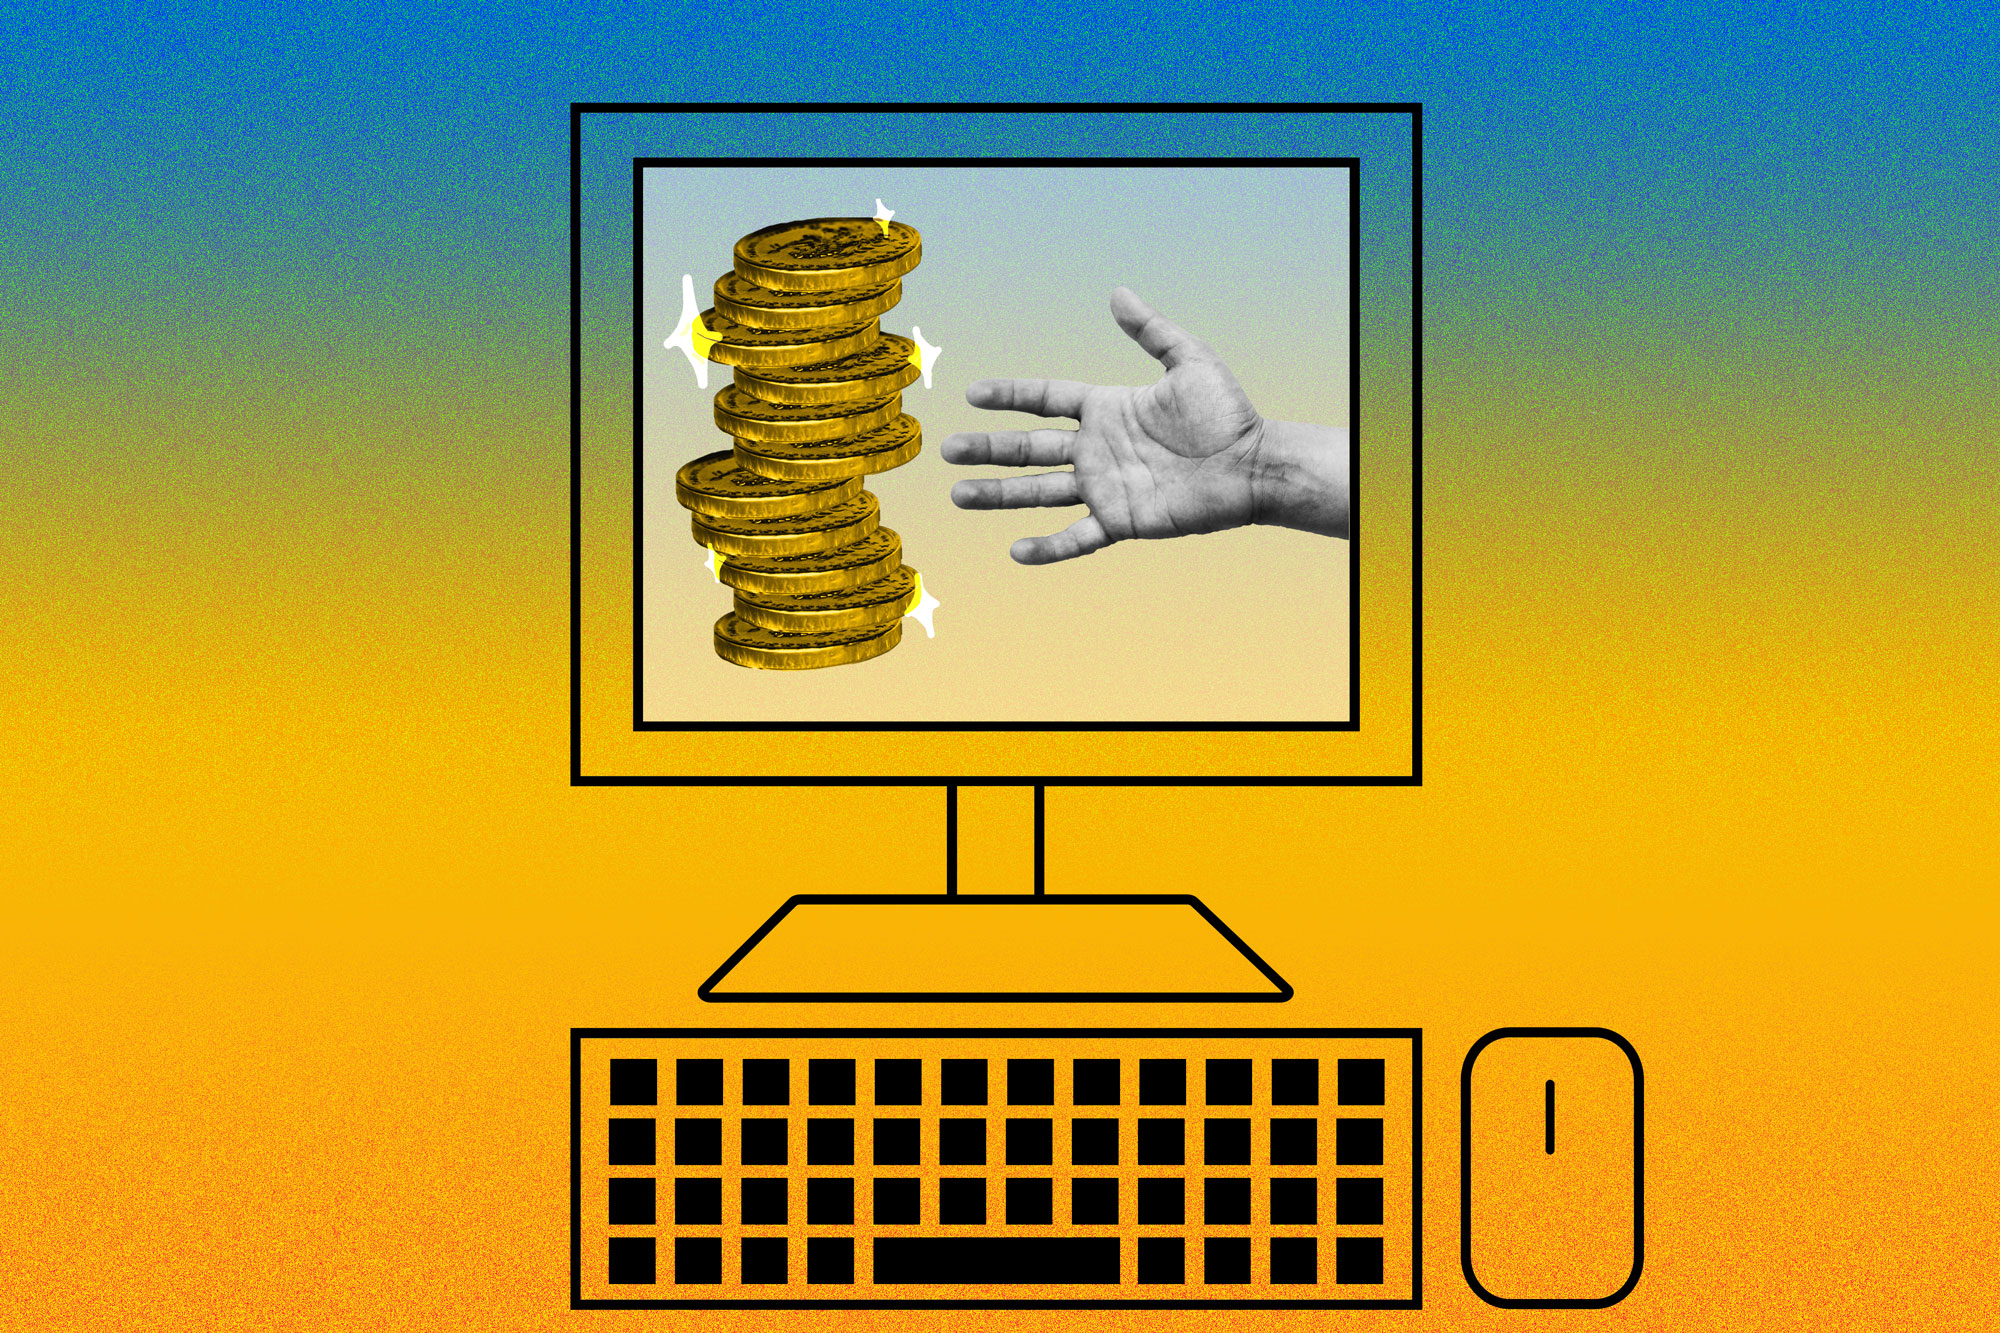 An illustration of a hand reaching for coins  on a computer monitor screen